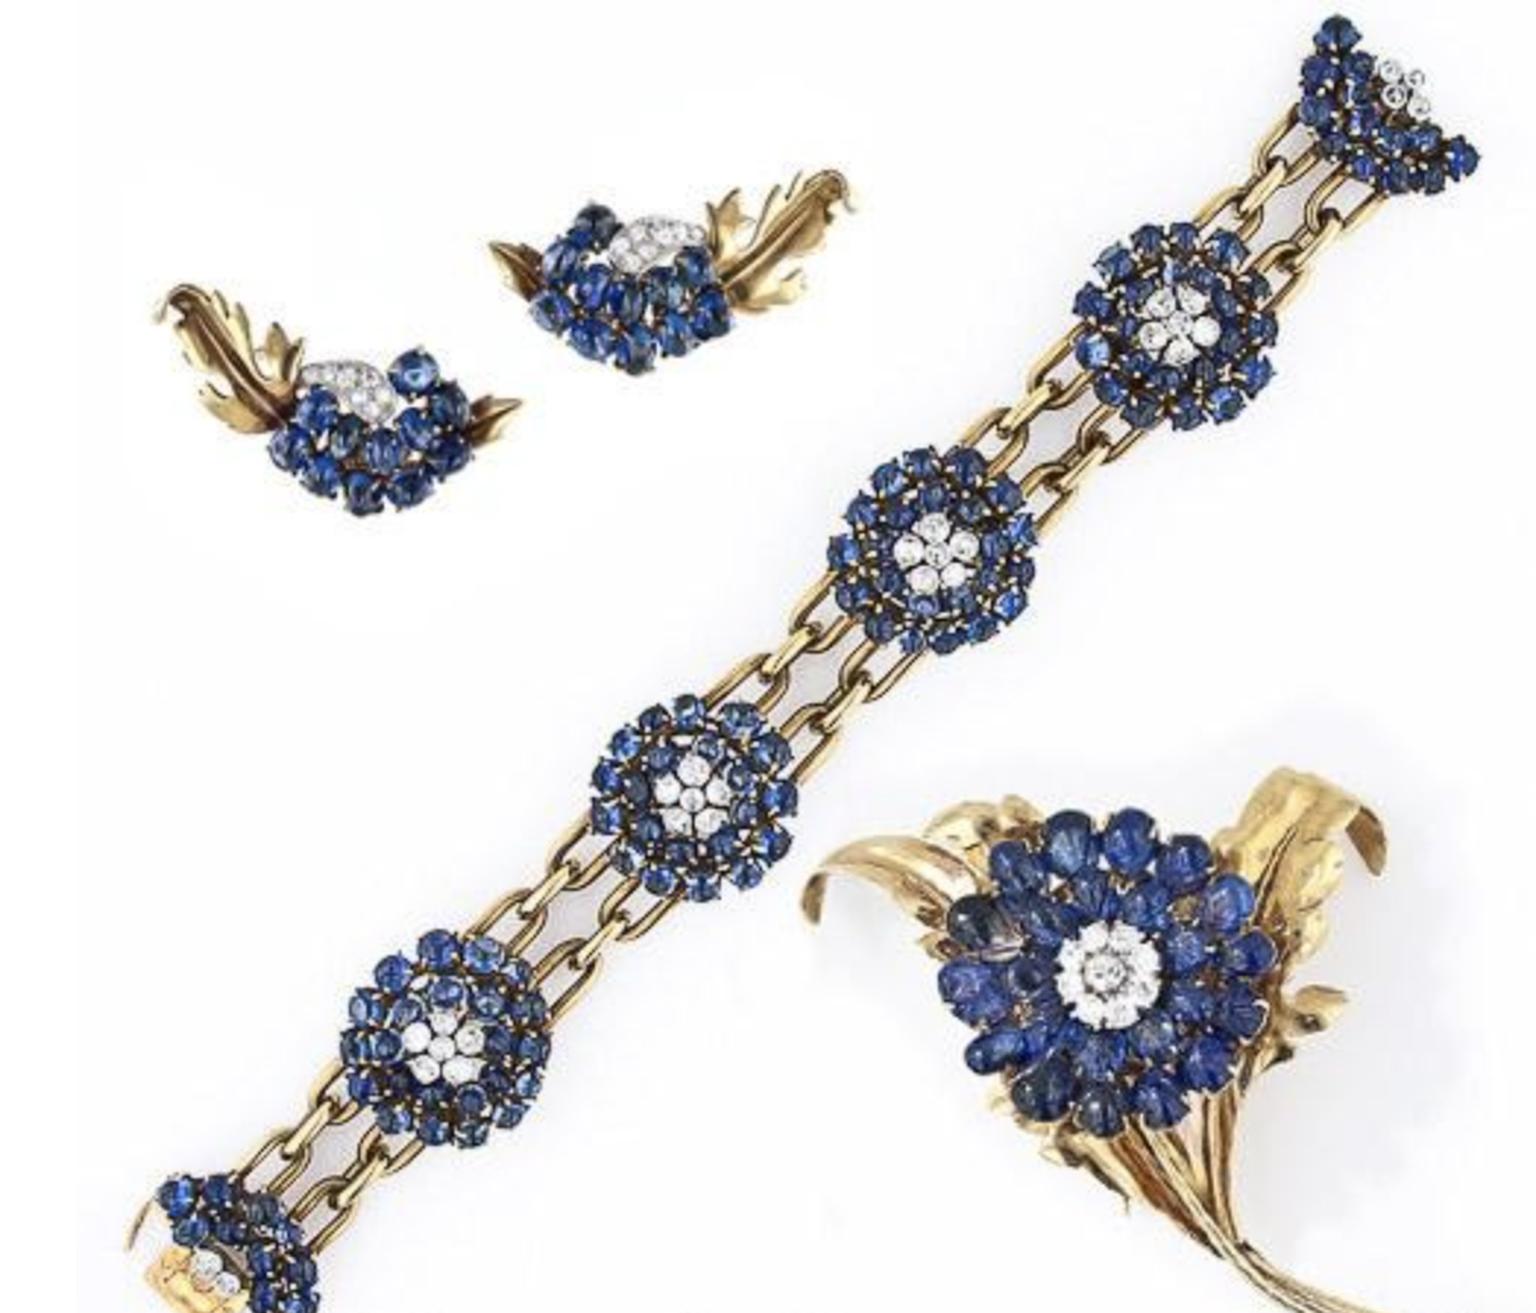 Chaulmet sapphire pin, bracelet and earrings suite sold by Lang Antiques